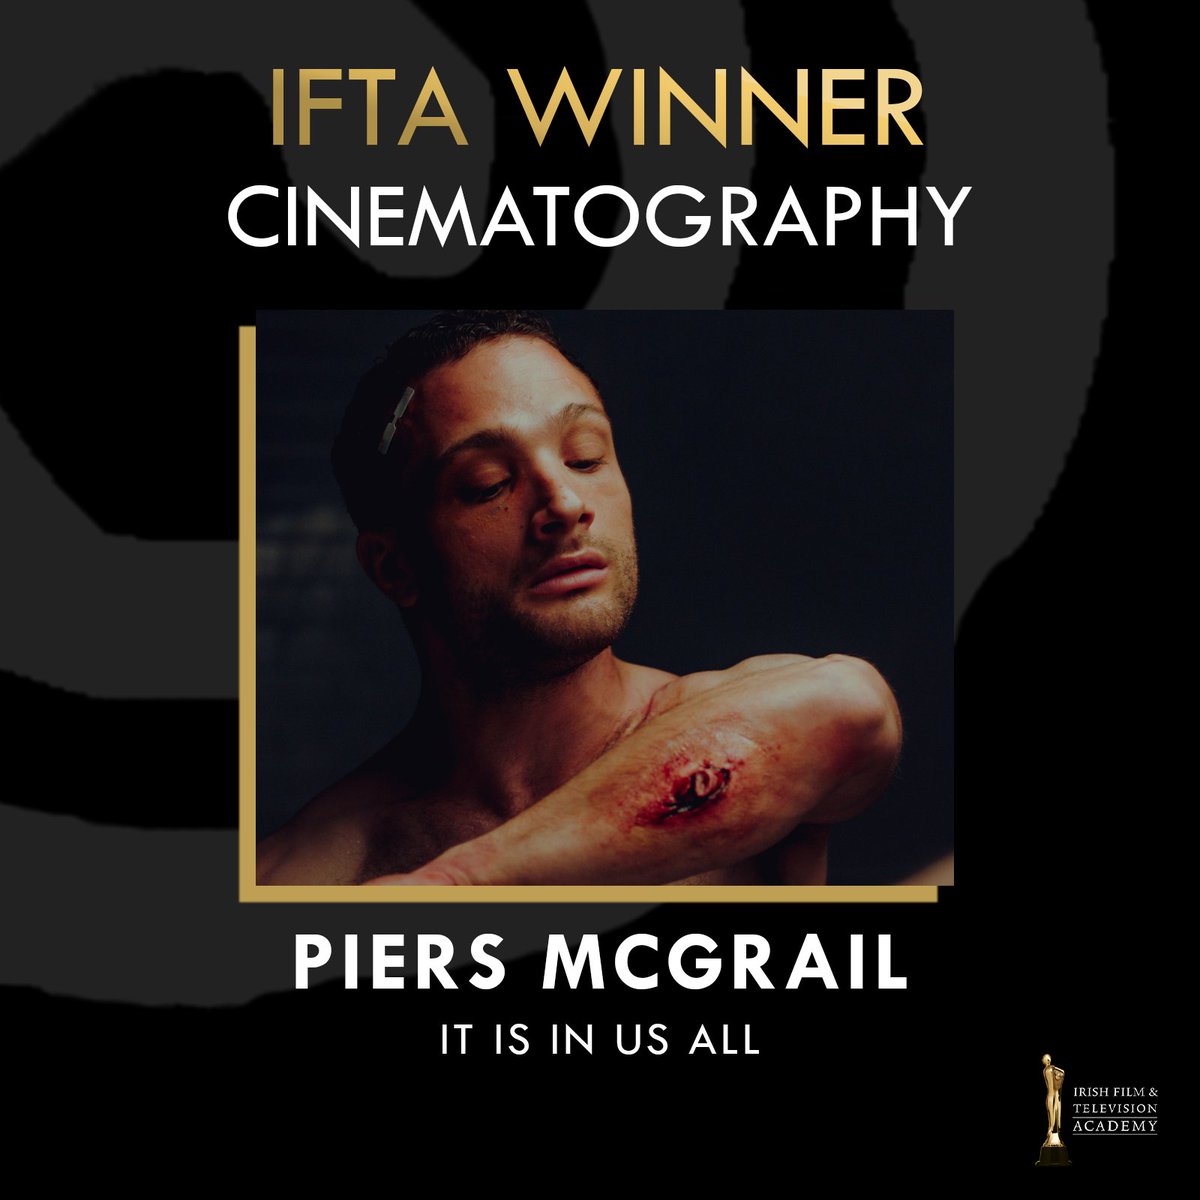 The #IFTA for Best Cinematography goes to.... Piers McGrail for It Is In Us All!